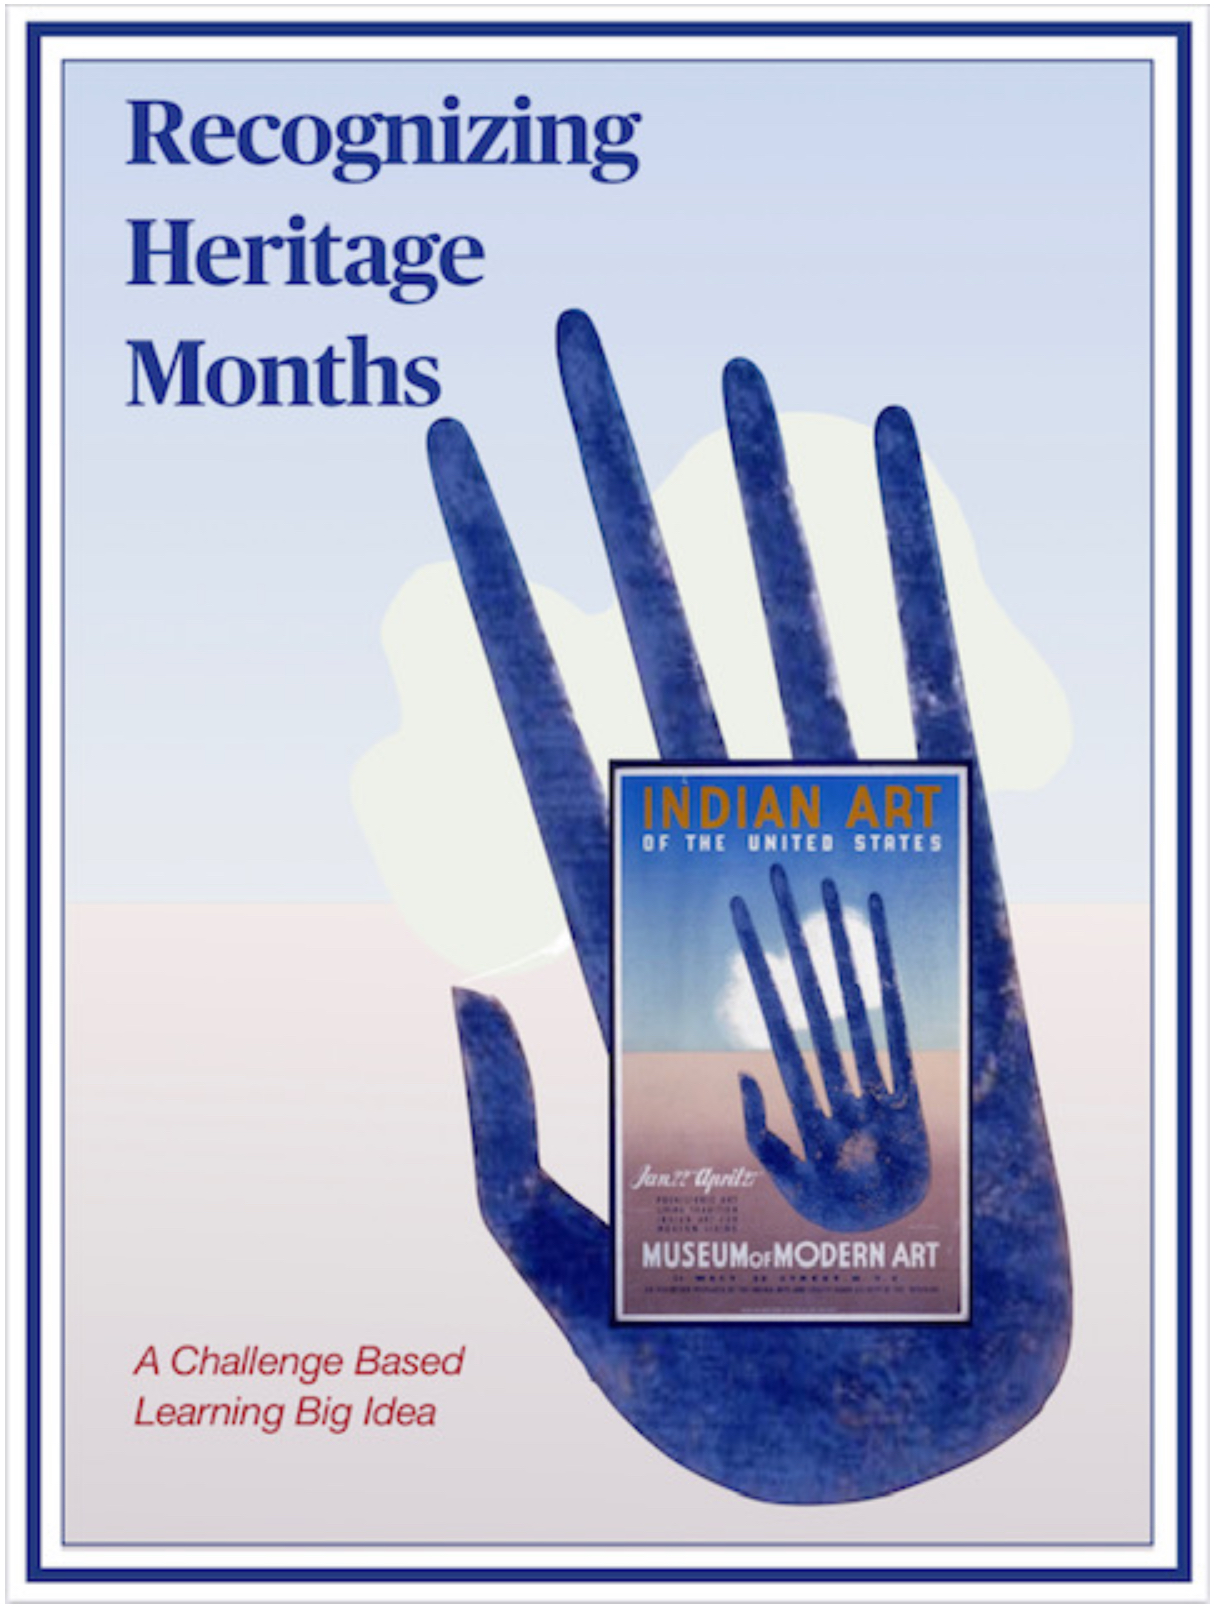 Book Cover - Recognizing Heritage Months